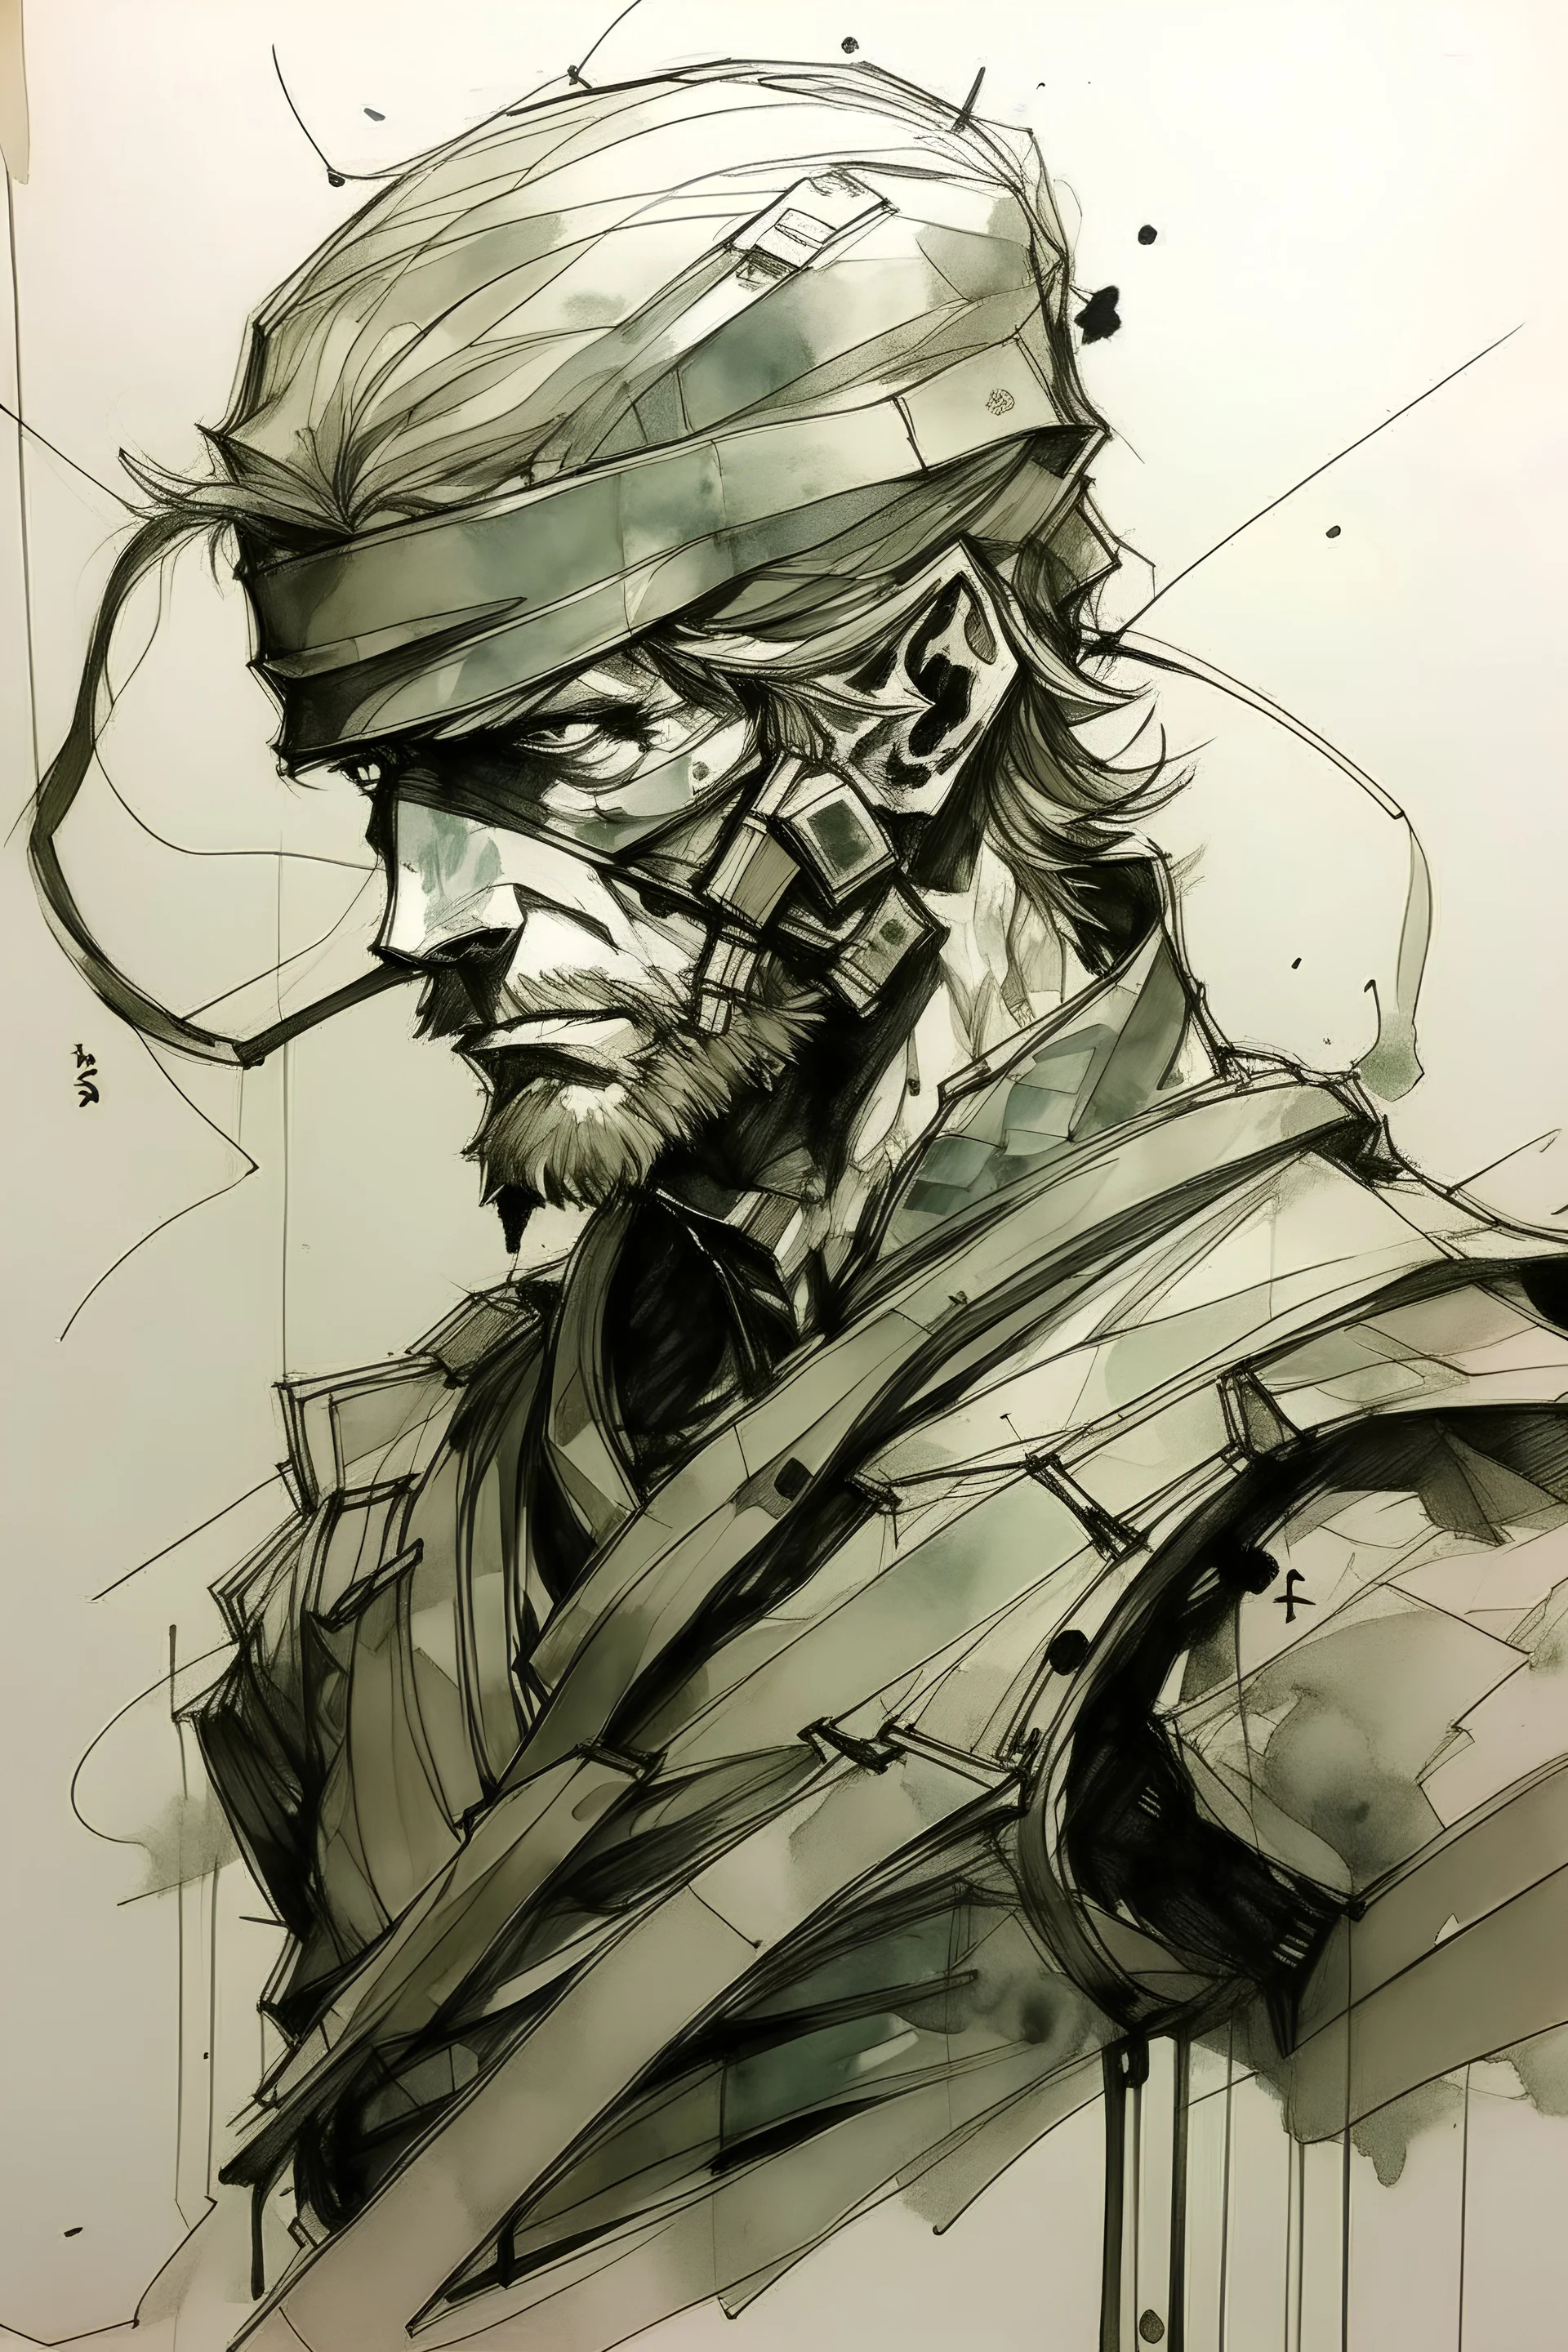 Solid Snake-Artwork by @starart_ia